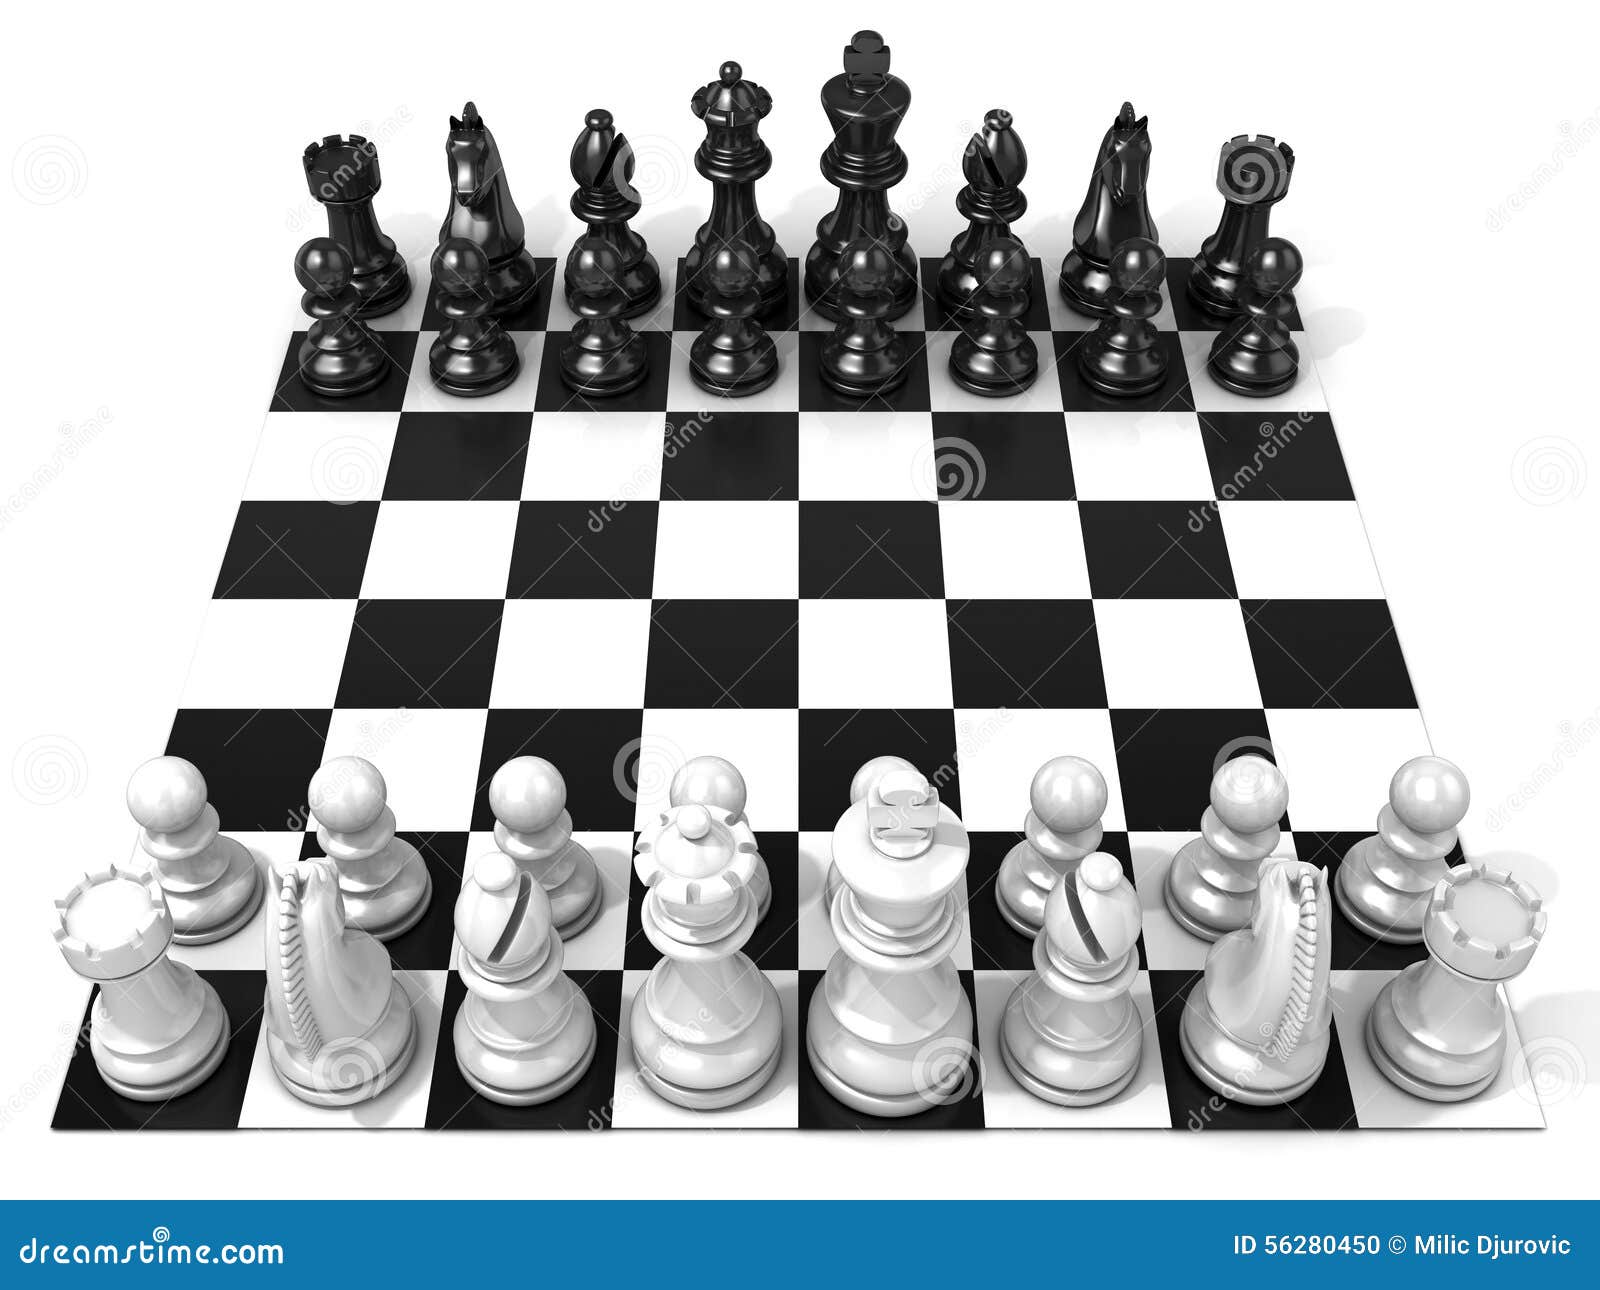 Chess Pieces In Portrait Mode Background, Chess Pieces Names With Picture  Background Image And Wallpaper for Free Download